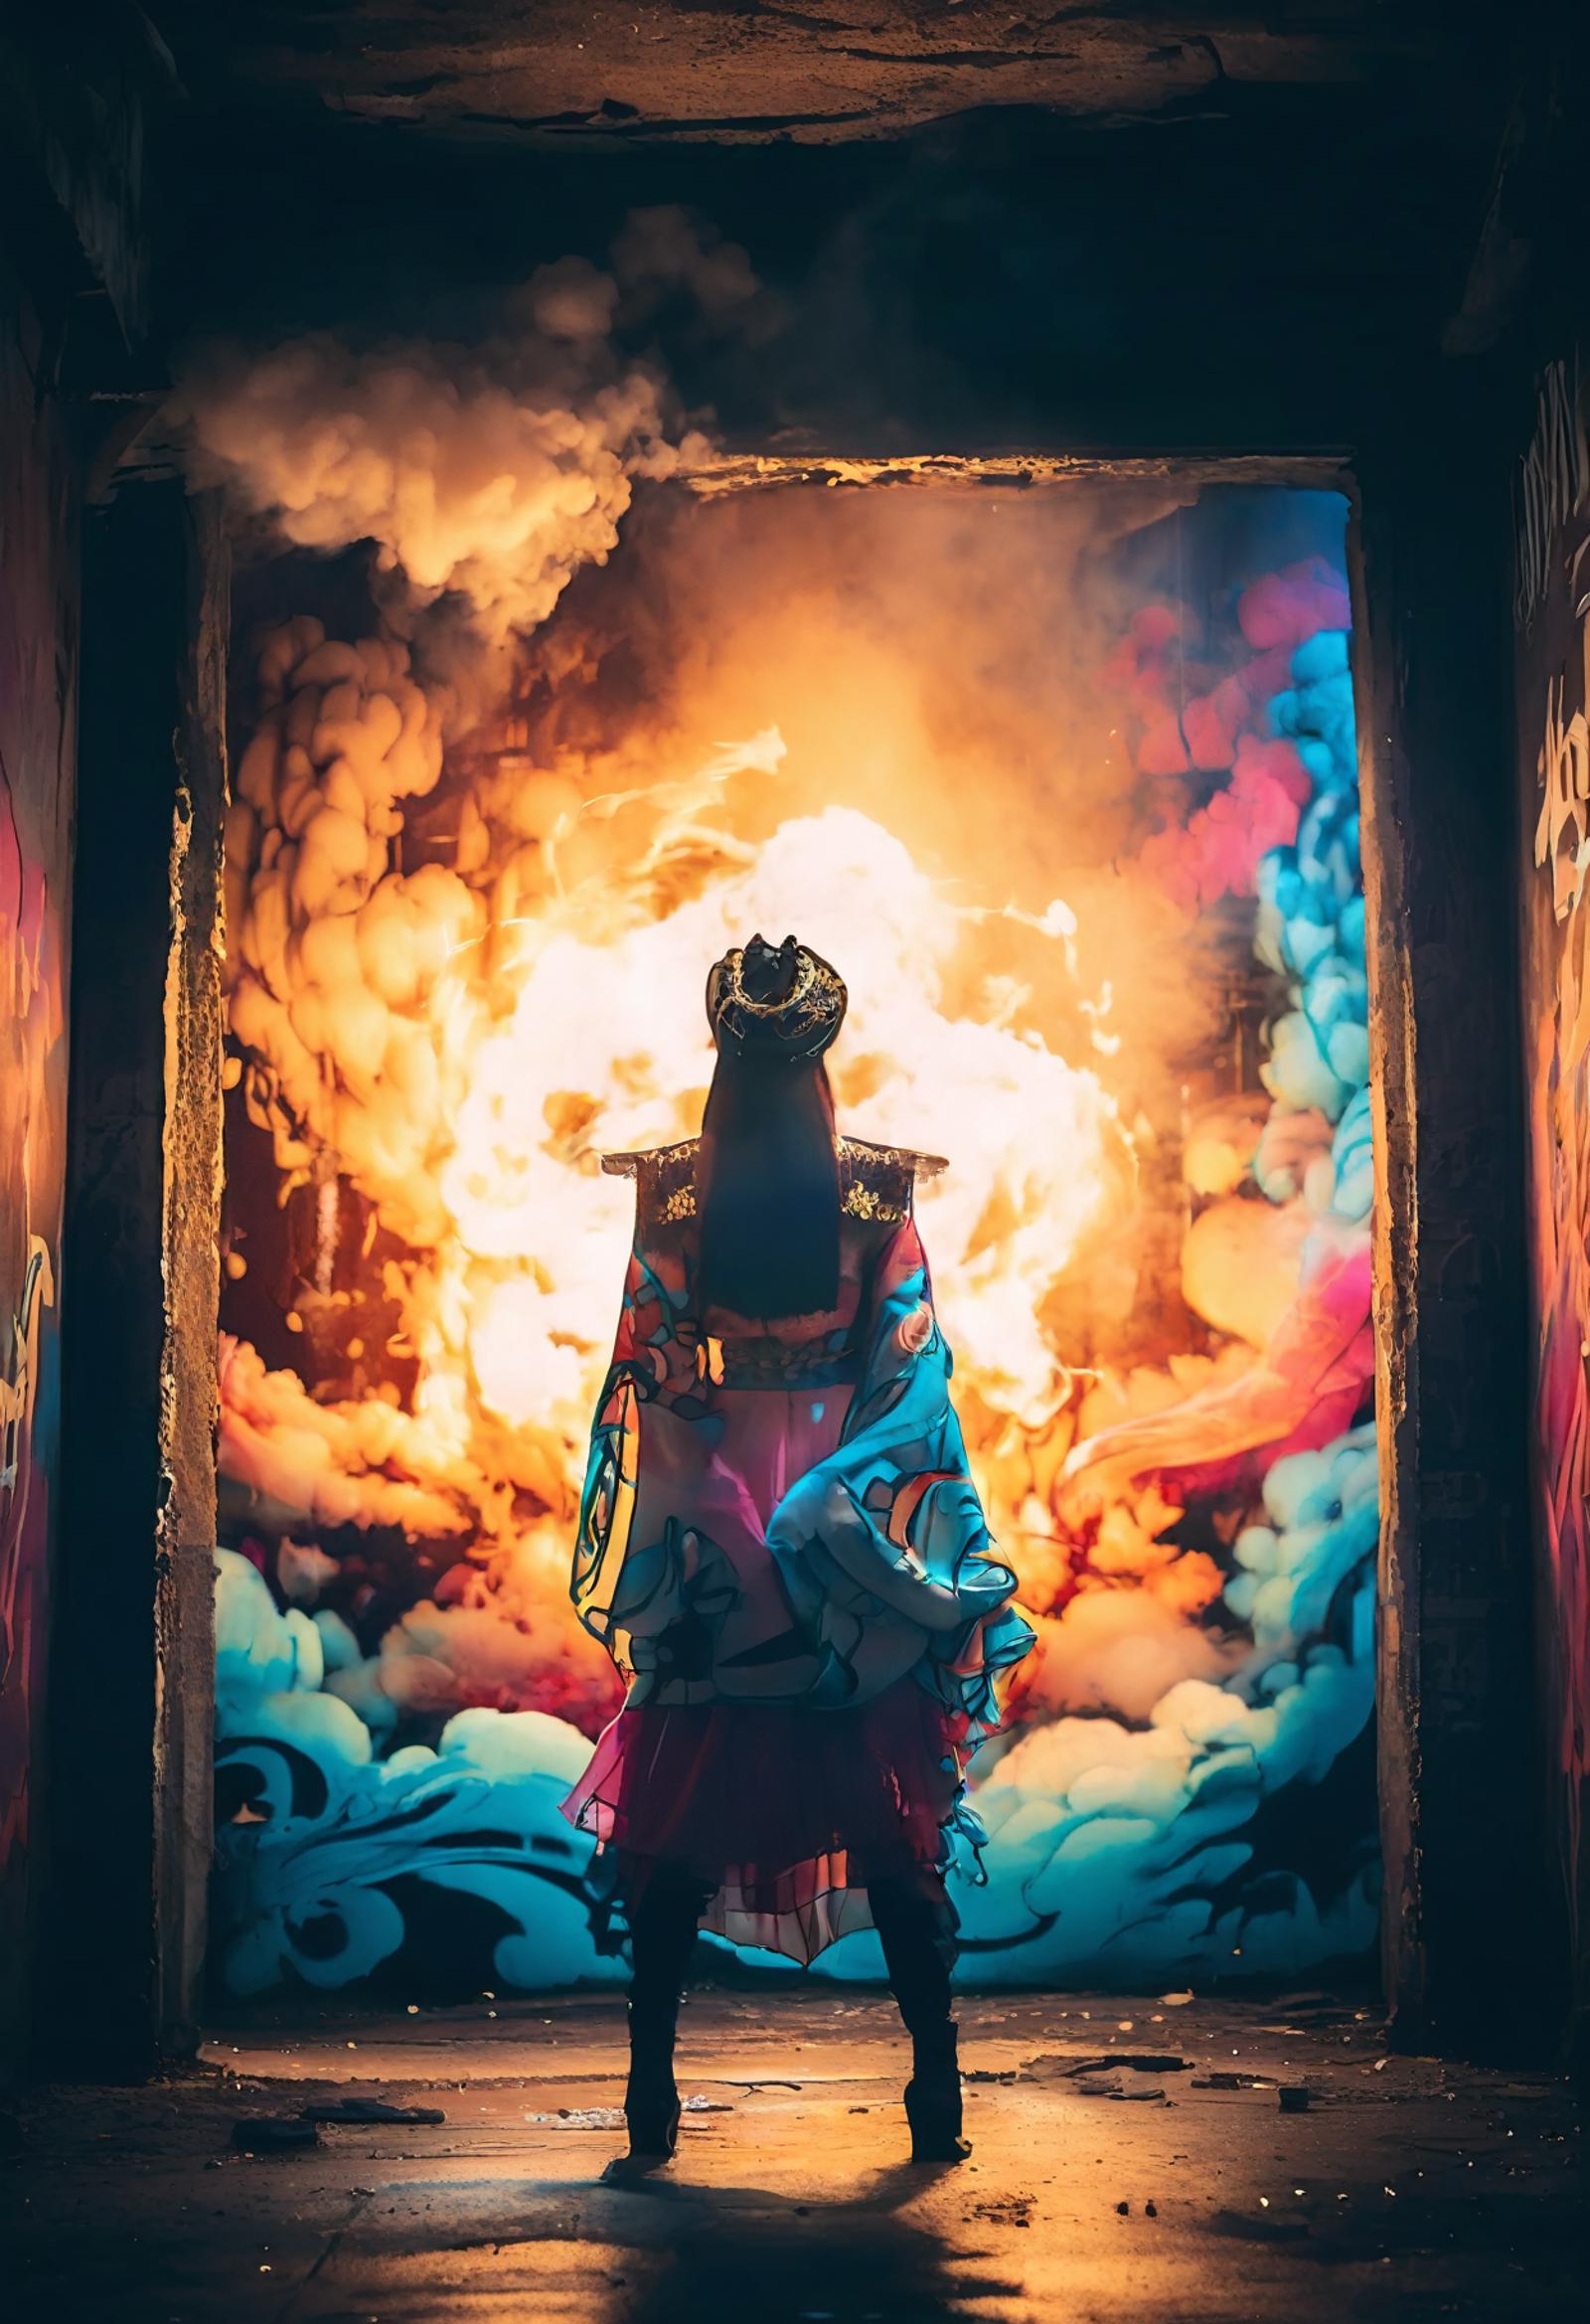 A woman in a kimono standing in front of a fire, smoke and clouds surrounding her.